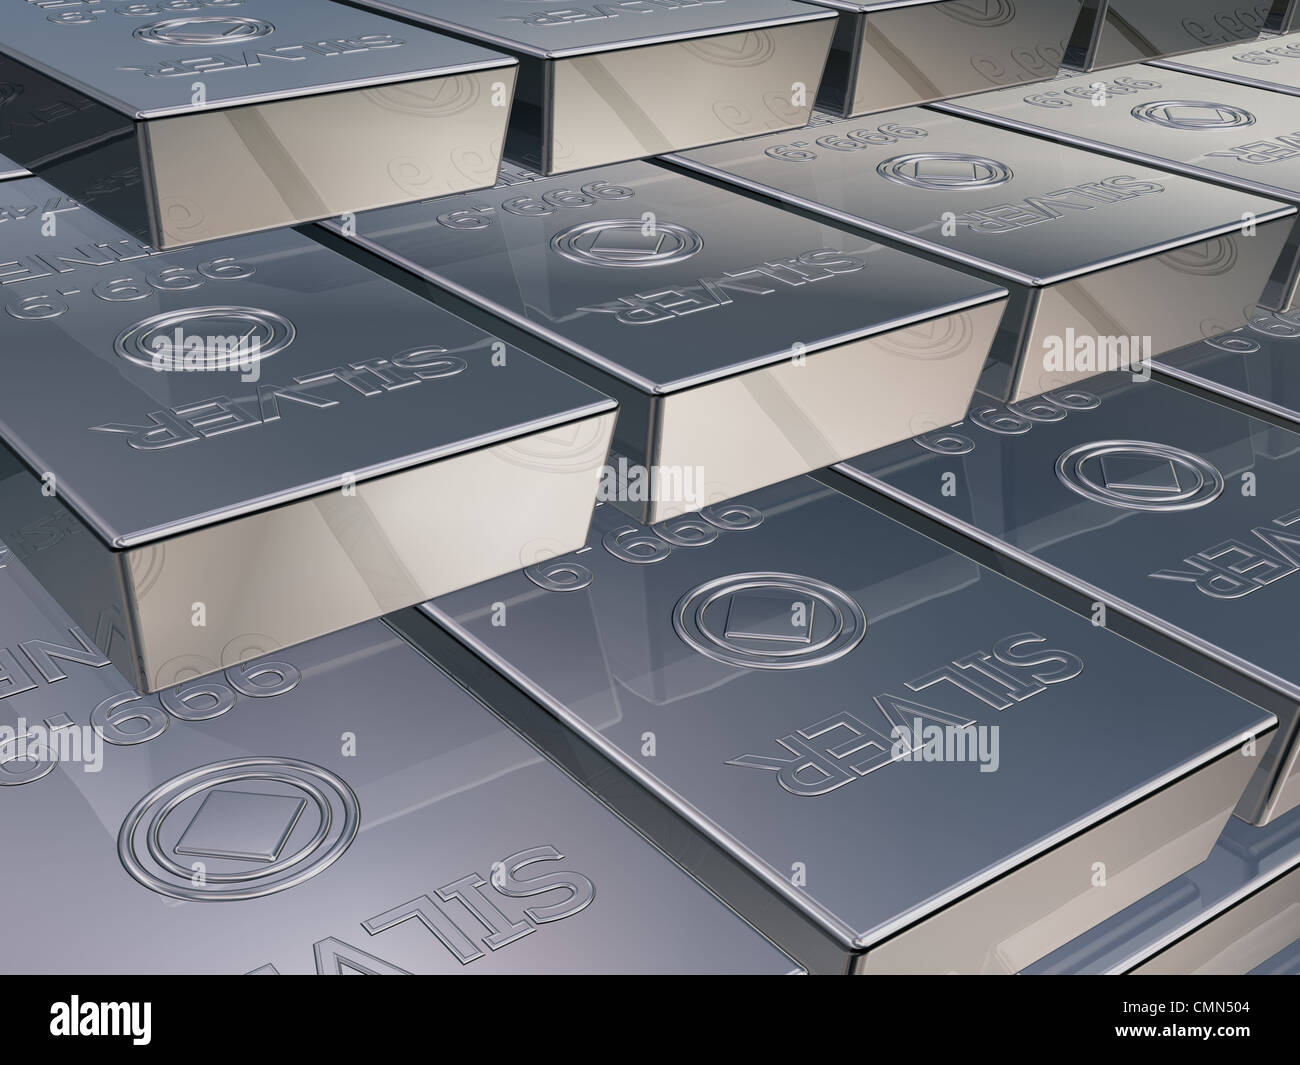 Illustration of silver reserves piled high in a stack Stock Photo